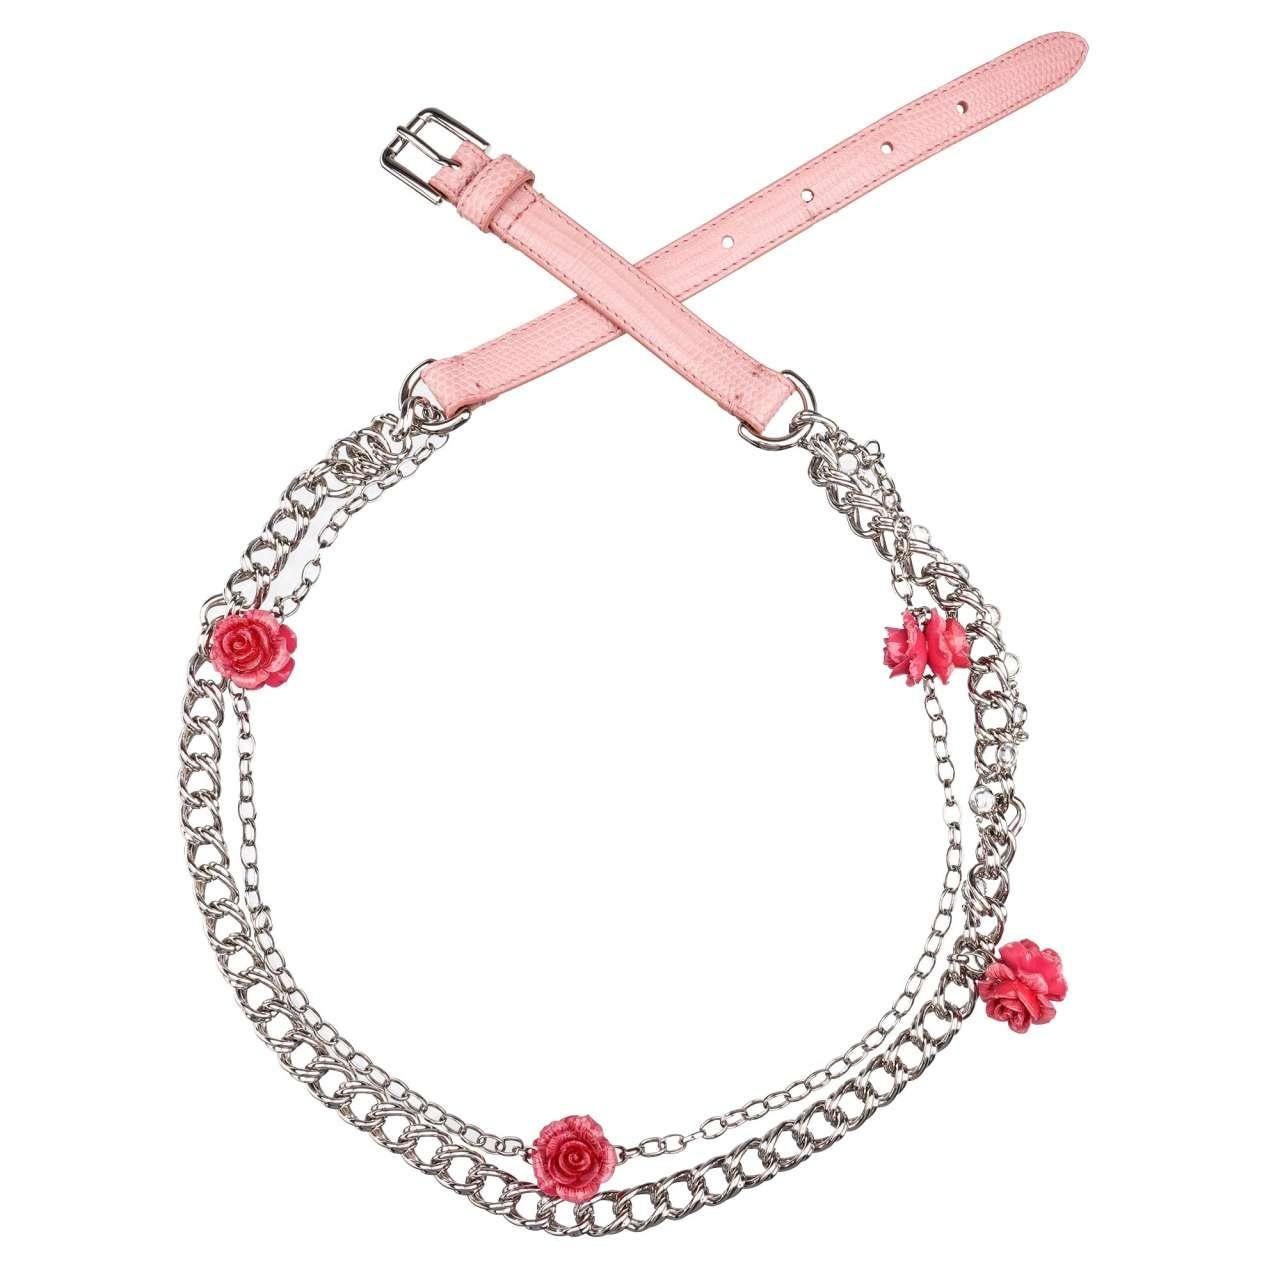 Women's D&G Rose Roses Crystal Lizzard Structure Leather Chain Belt Pink Silver M For Sale